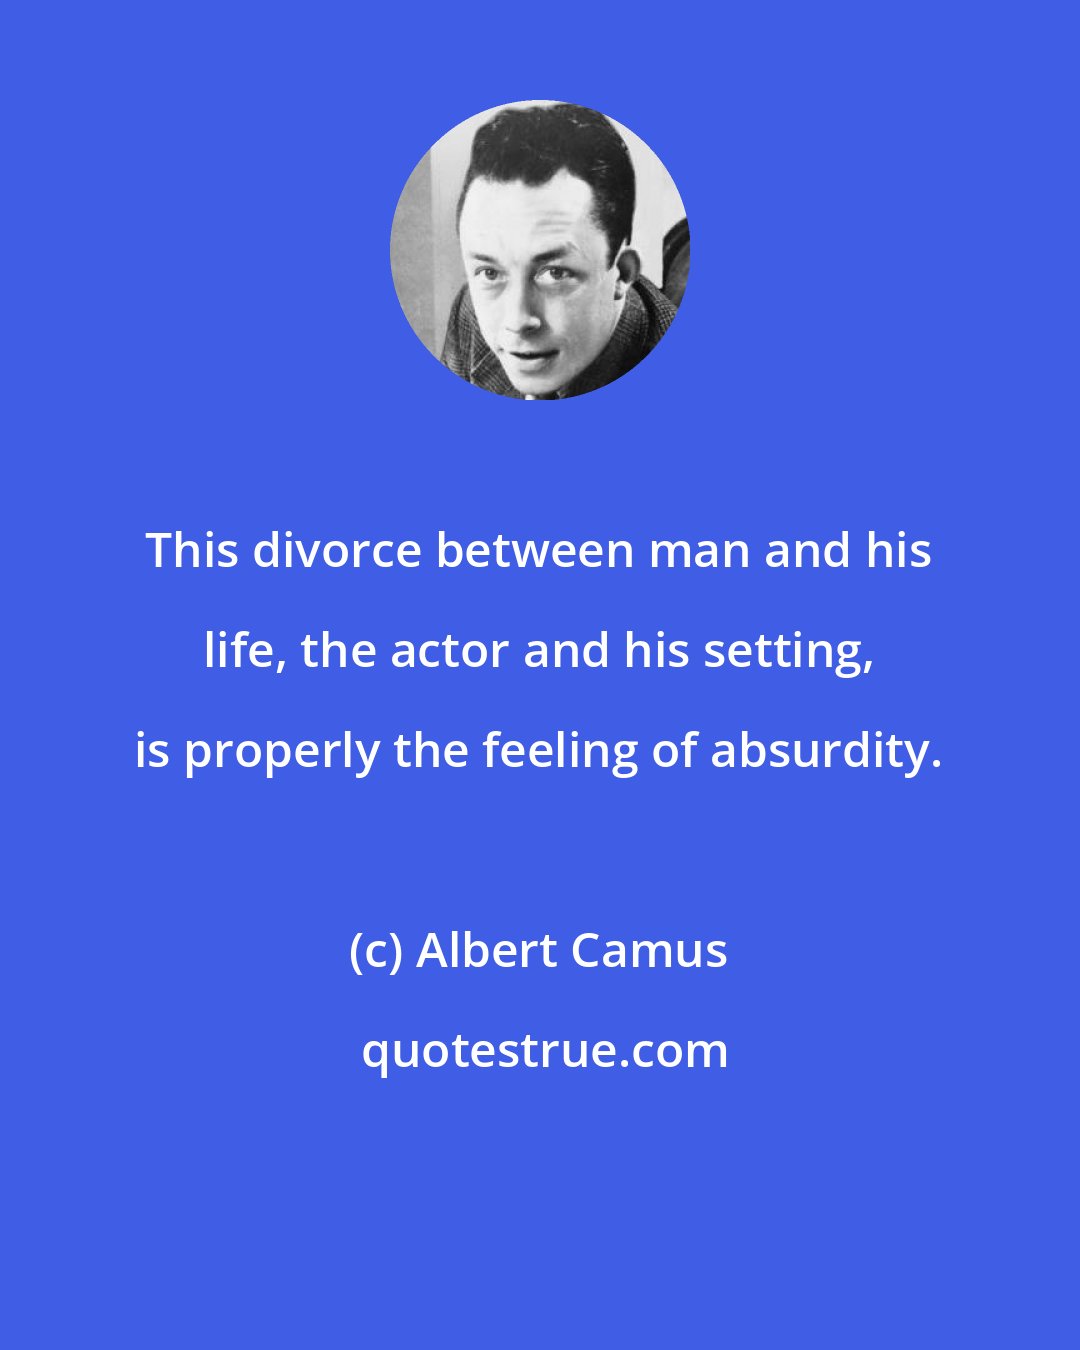 Albert Camus: This divorce between man and his life, the actor and his setting, is properly the feeling of absurdity.